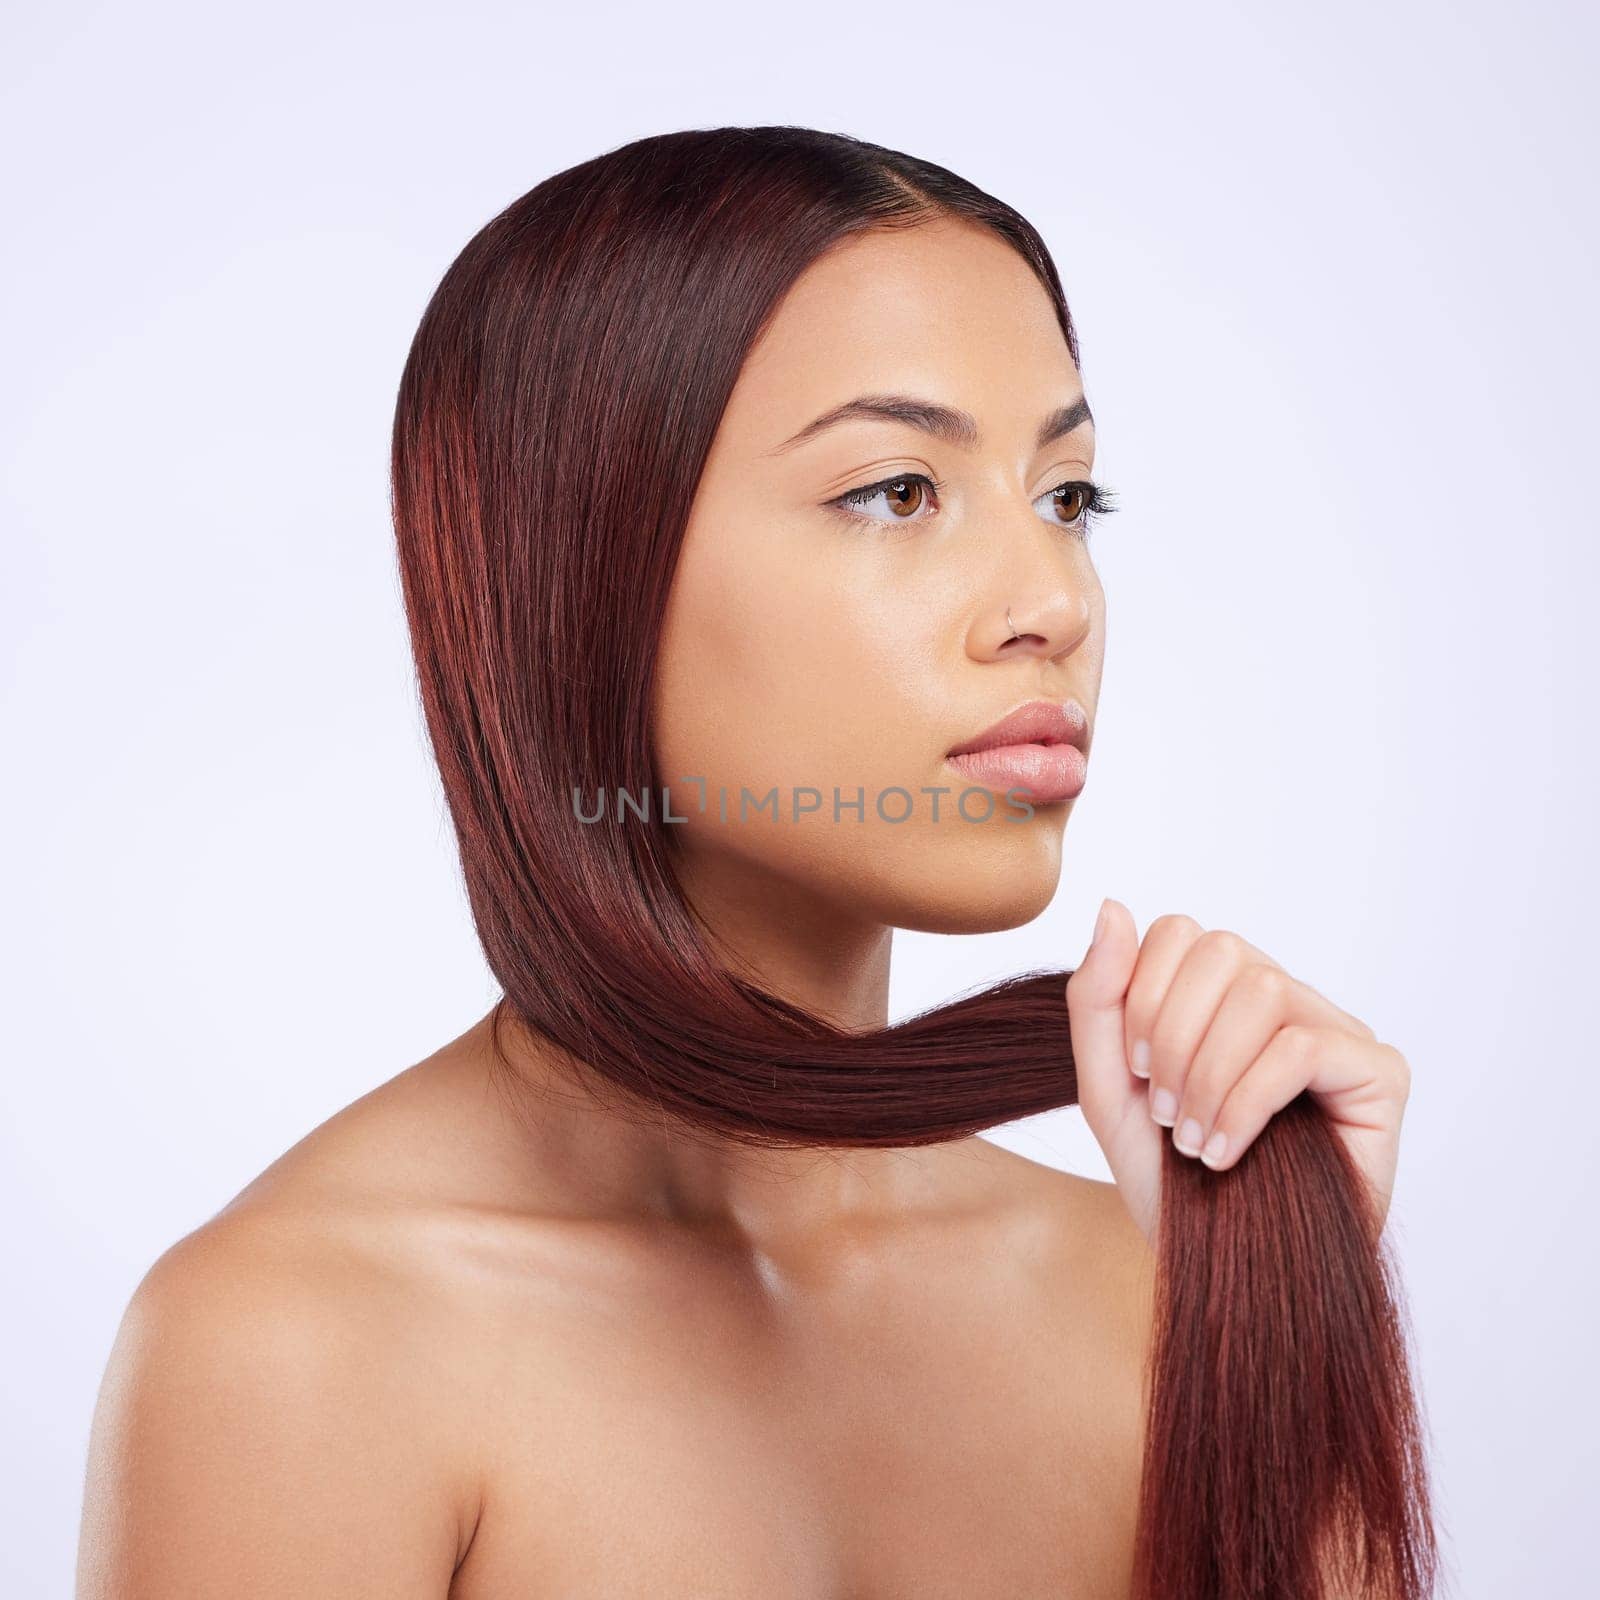 Haircare, beauty and woman holding hair, straight hairstyle and luxury salon shine isolated on white background. Haircut, keratin glow and serious expression of Brazilian model in studio backdrop